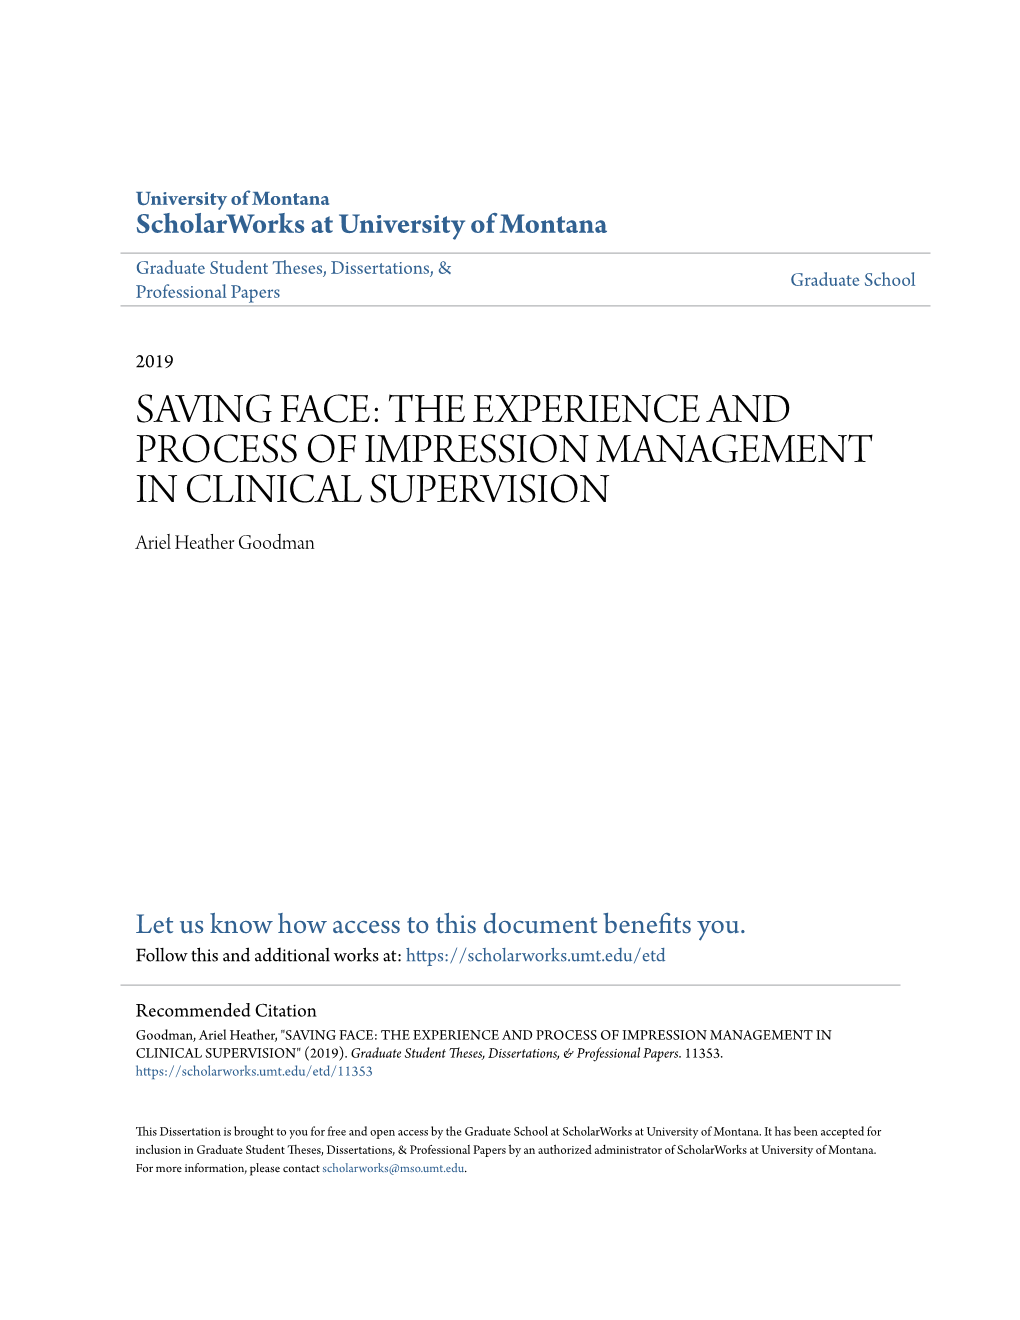 THE EXPERIENCE and PROCESS of IMPRESSION MANAGEMENT in CLINICAL SUPERVISION Ariel Heather Goodman